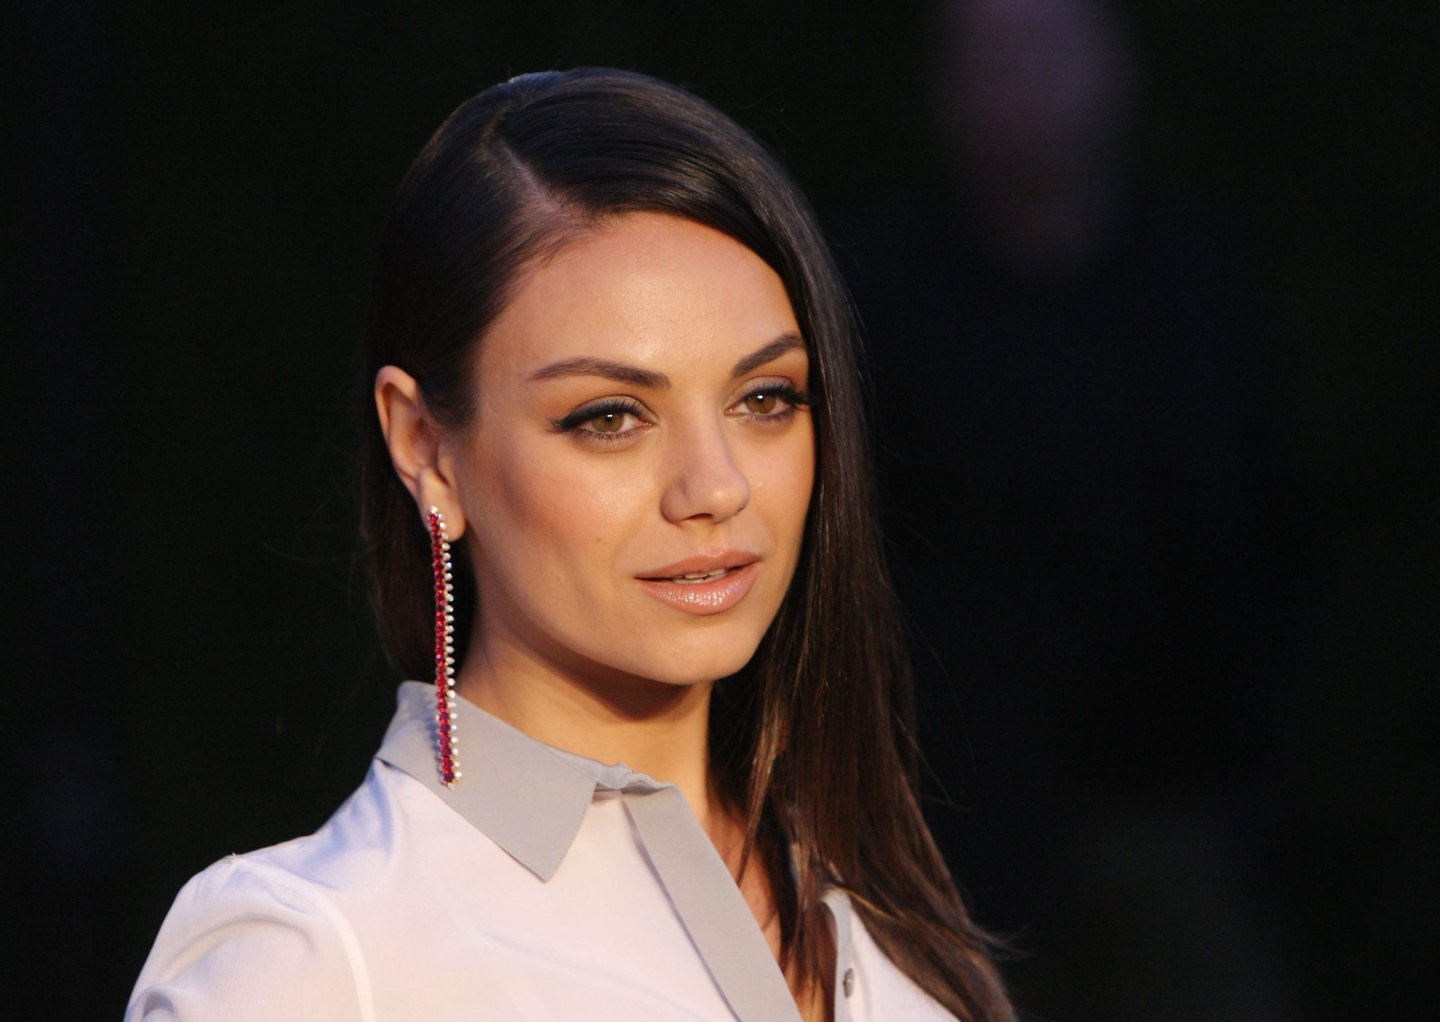 LOS ANGELES, CA - APRIL 16: Actress Mila Kunis attends the Burberry "London in Los Angeles" event at Griffith Observatory on April 16, 2015 in Los Angeles, California. (Photo by David Buchan/Getty Images)